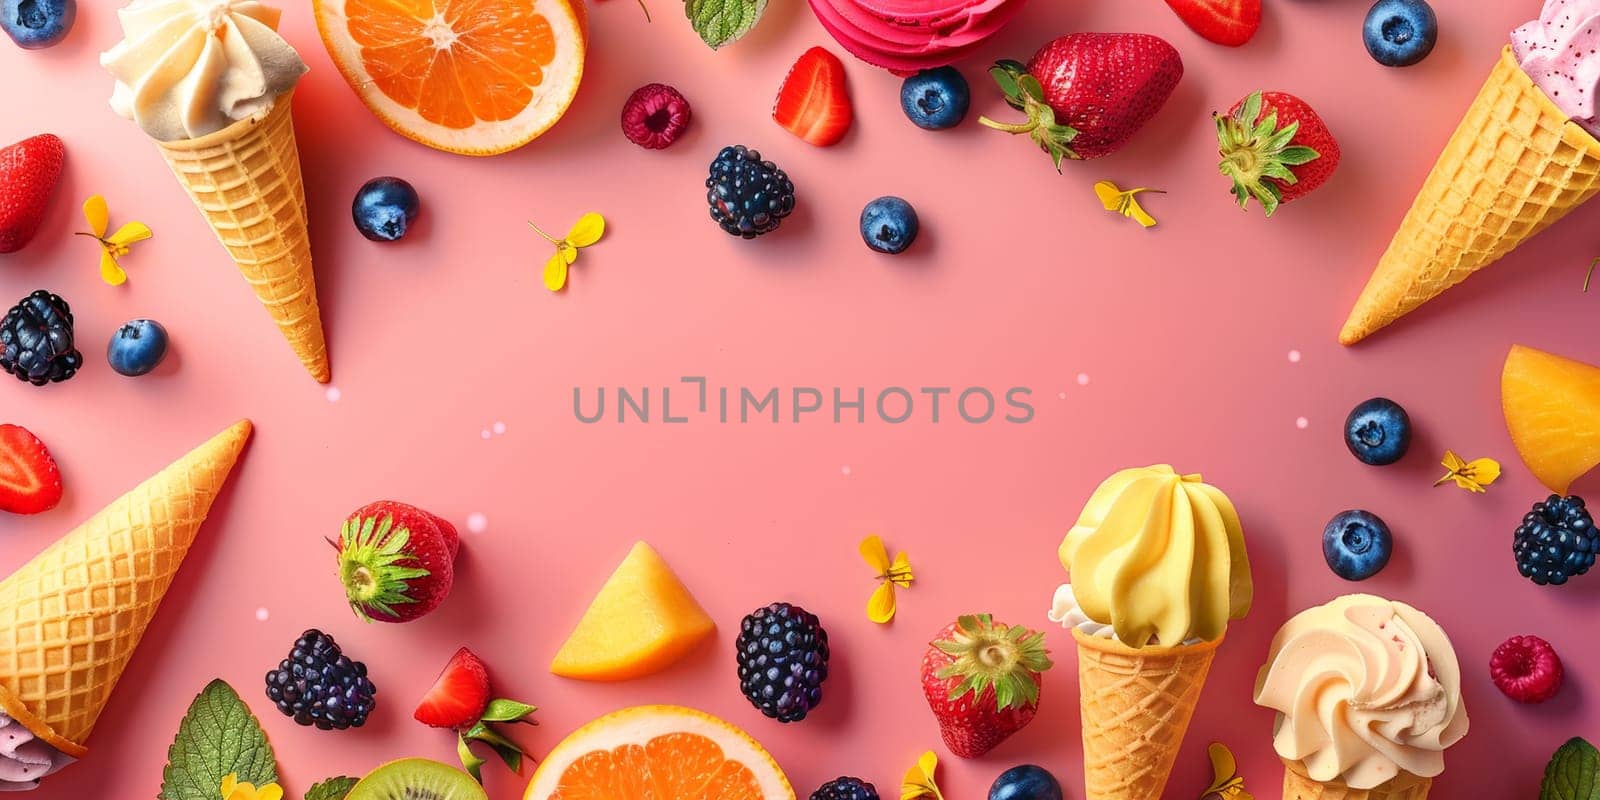 A colorful display of ice cream and fruit, including strawberries, blueberries by nateemee